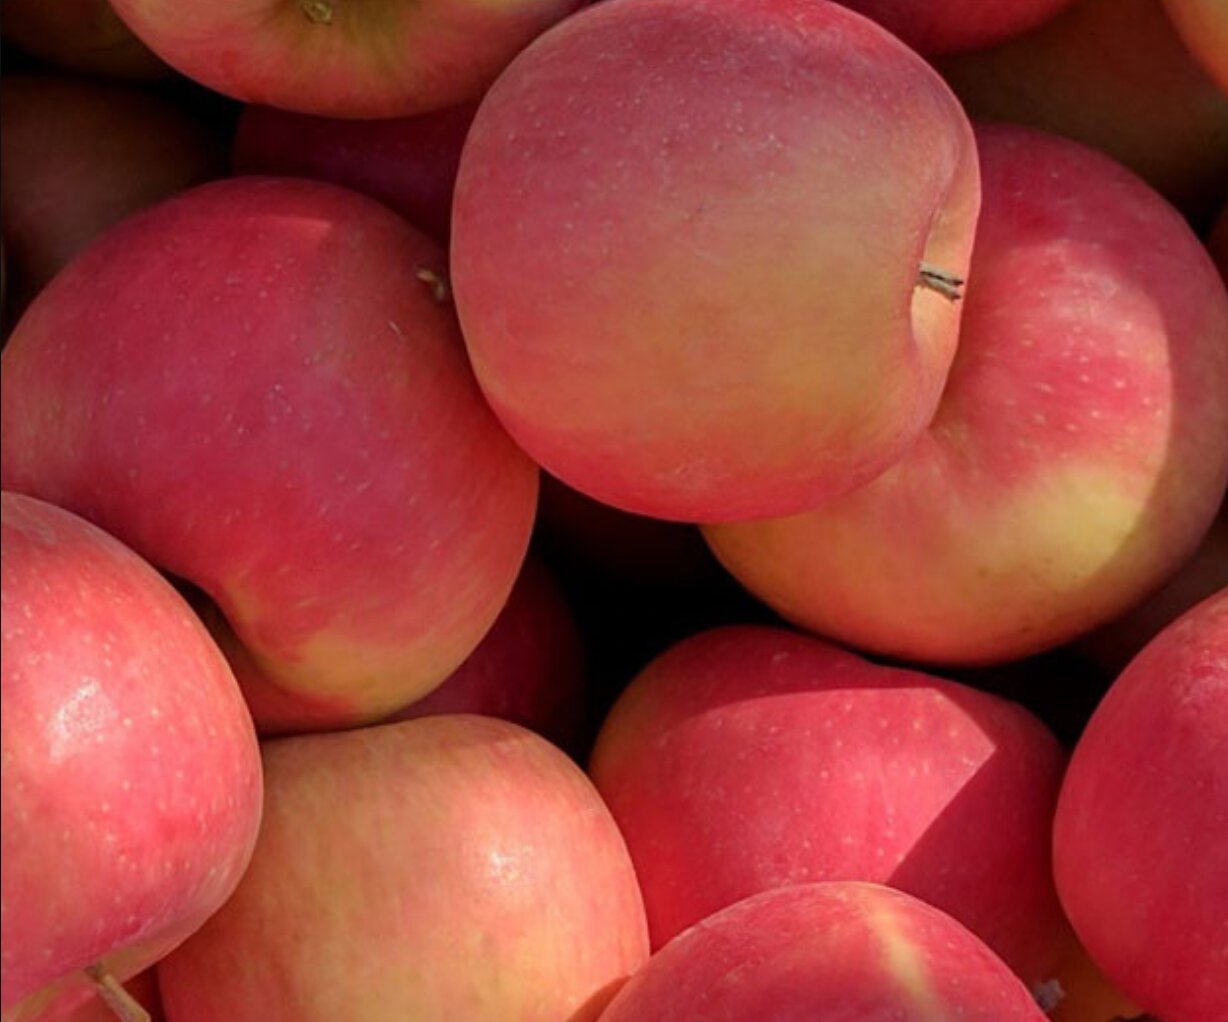 The apple was called "WA 64" and is a cross between Honeycrisp and Cripps Pink.